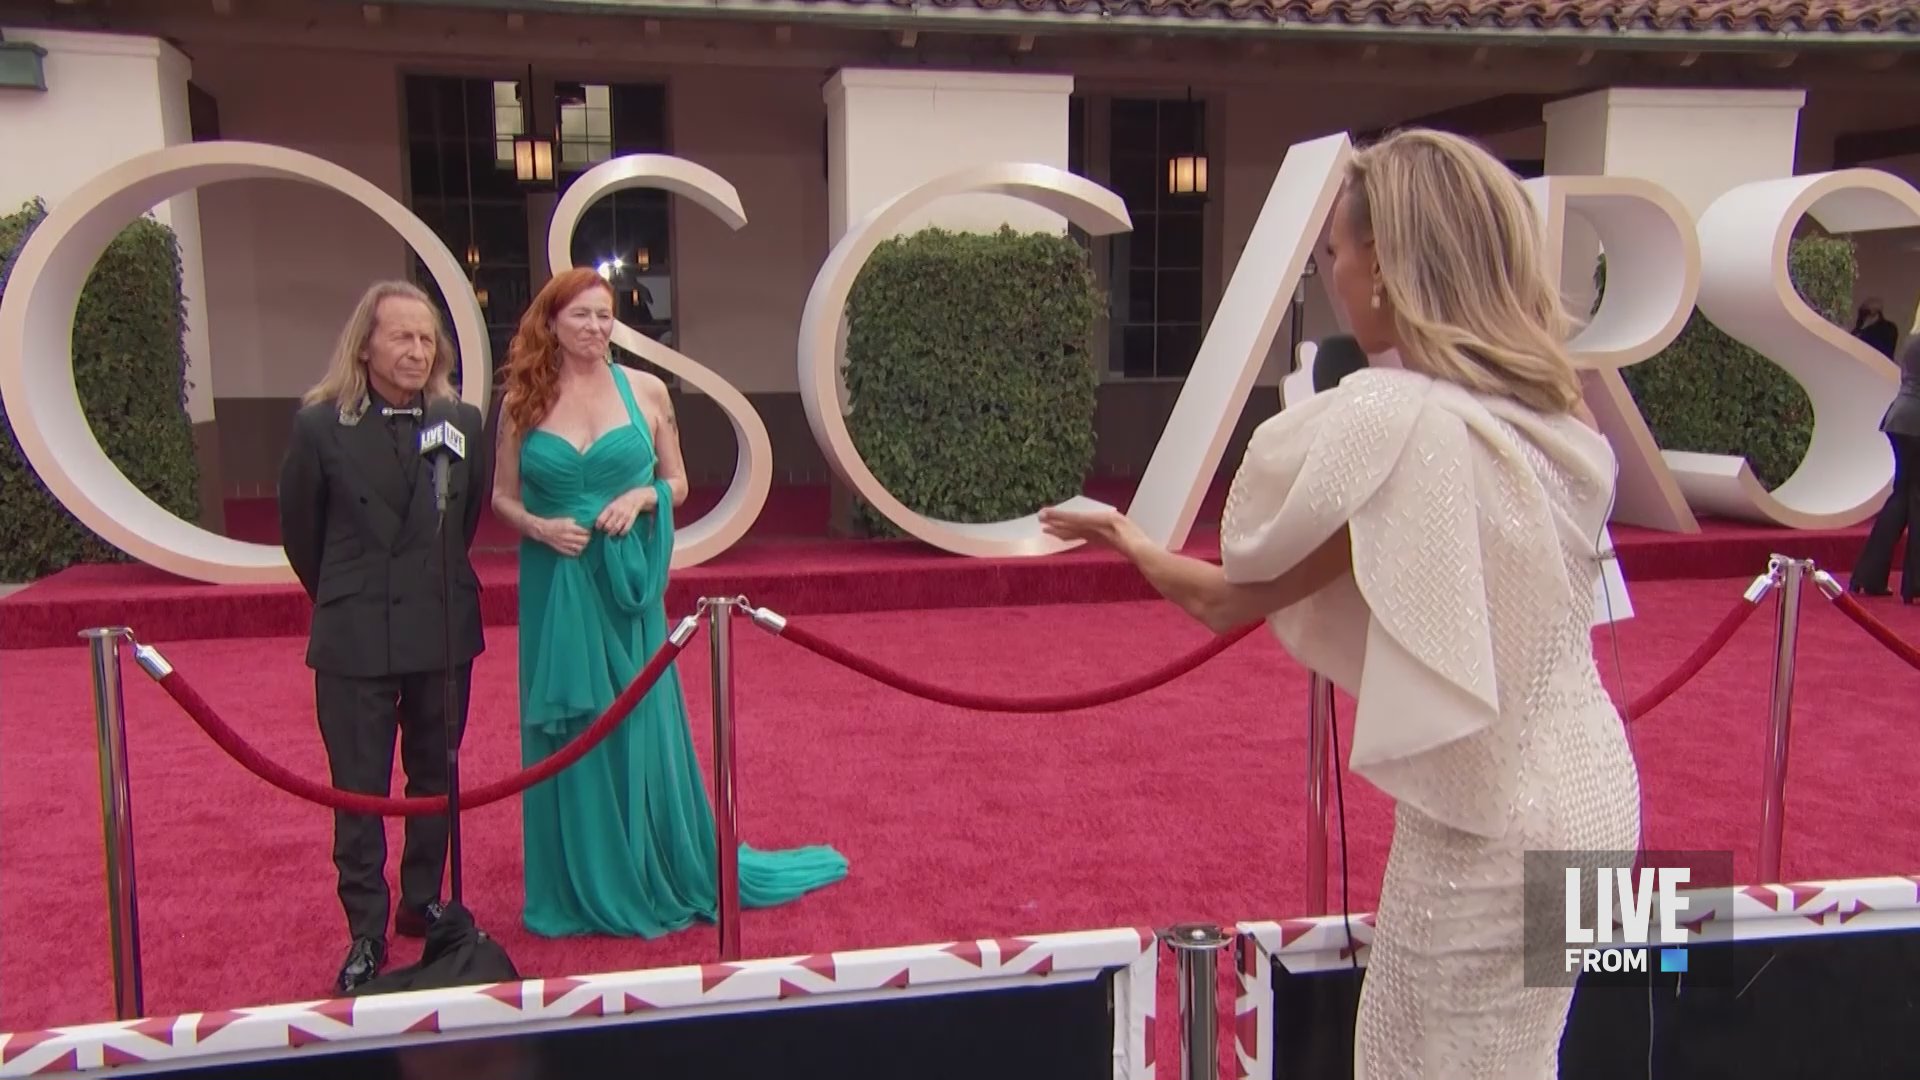 Watch E! Live From the Red Carpet online